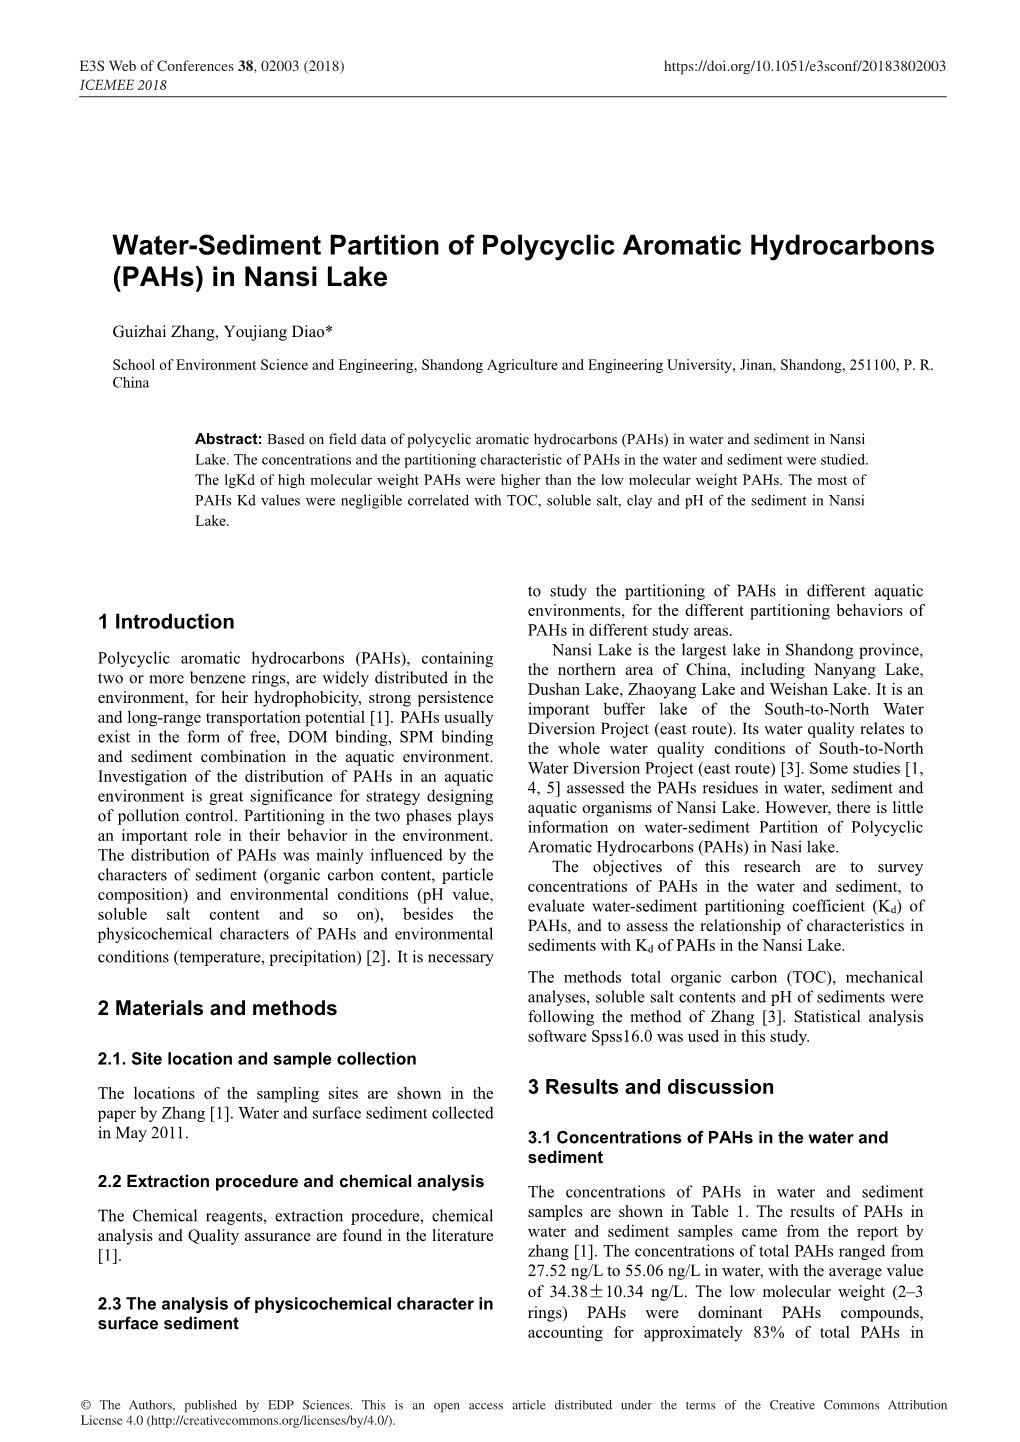 Water-Sediment Partition of Polycyclic Aromatic Hydrocarbons (Pahs) in Nansi Lake